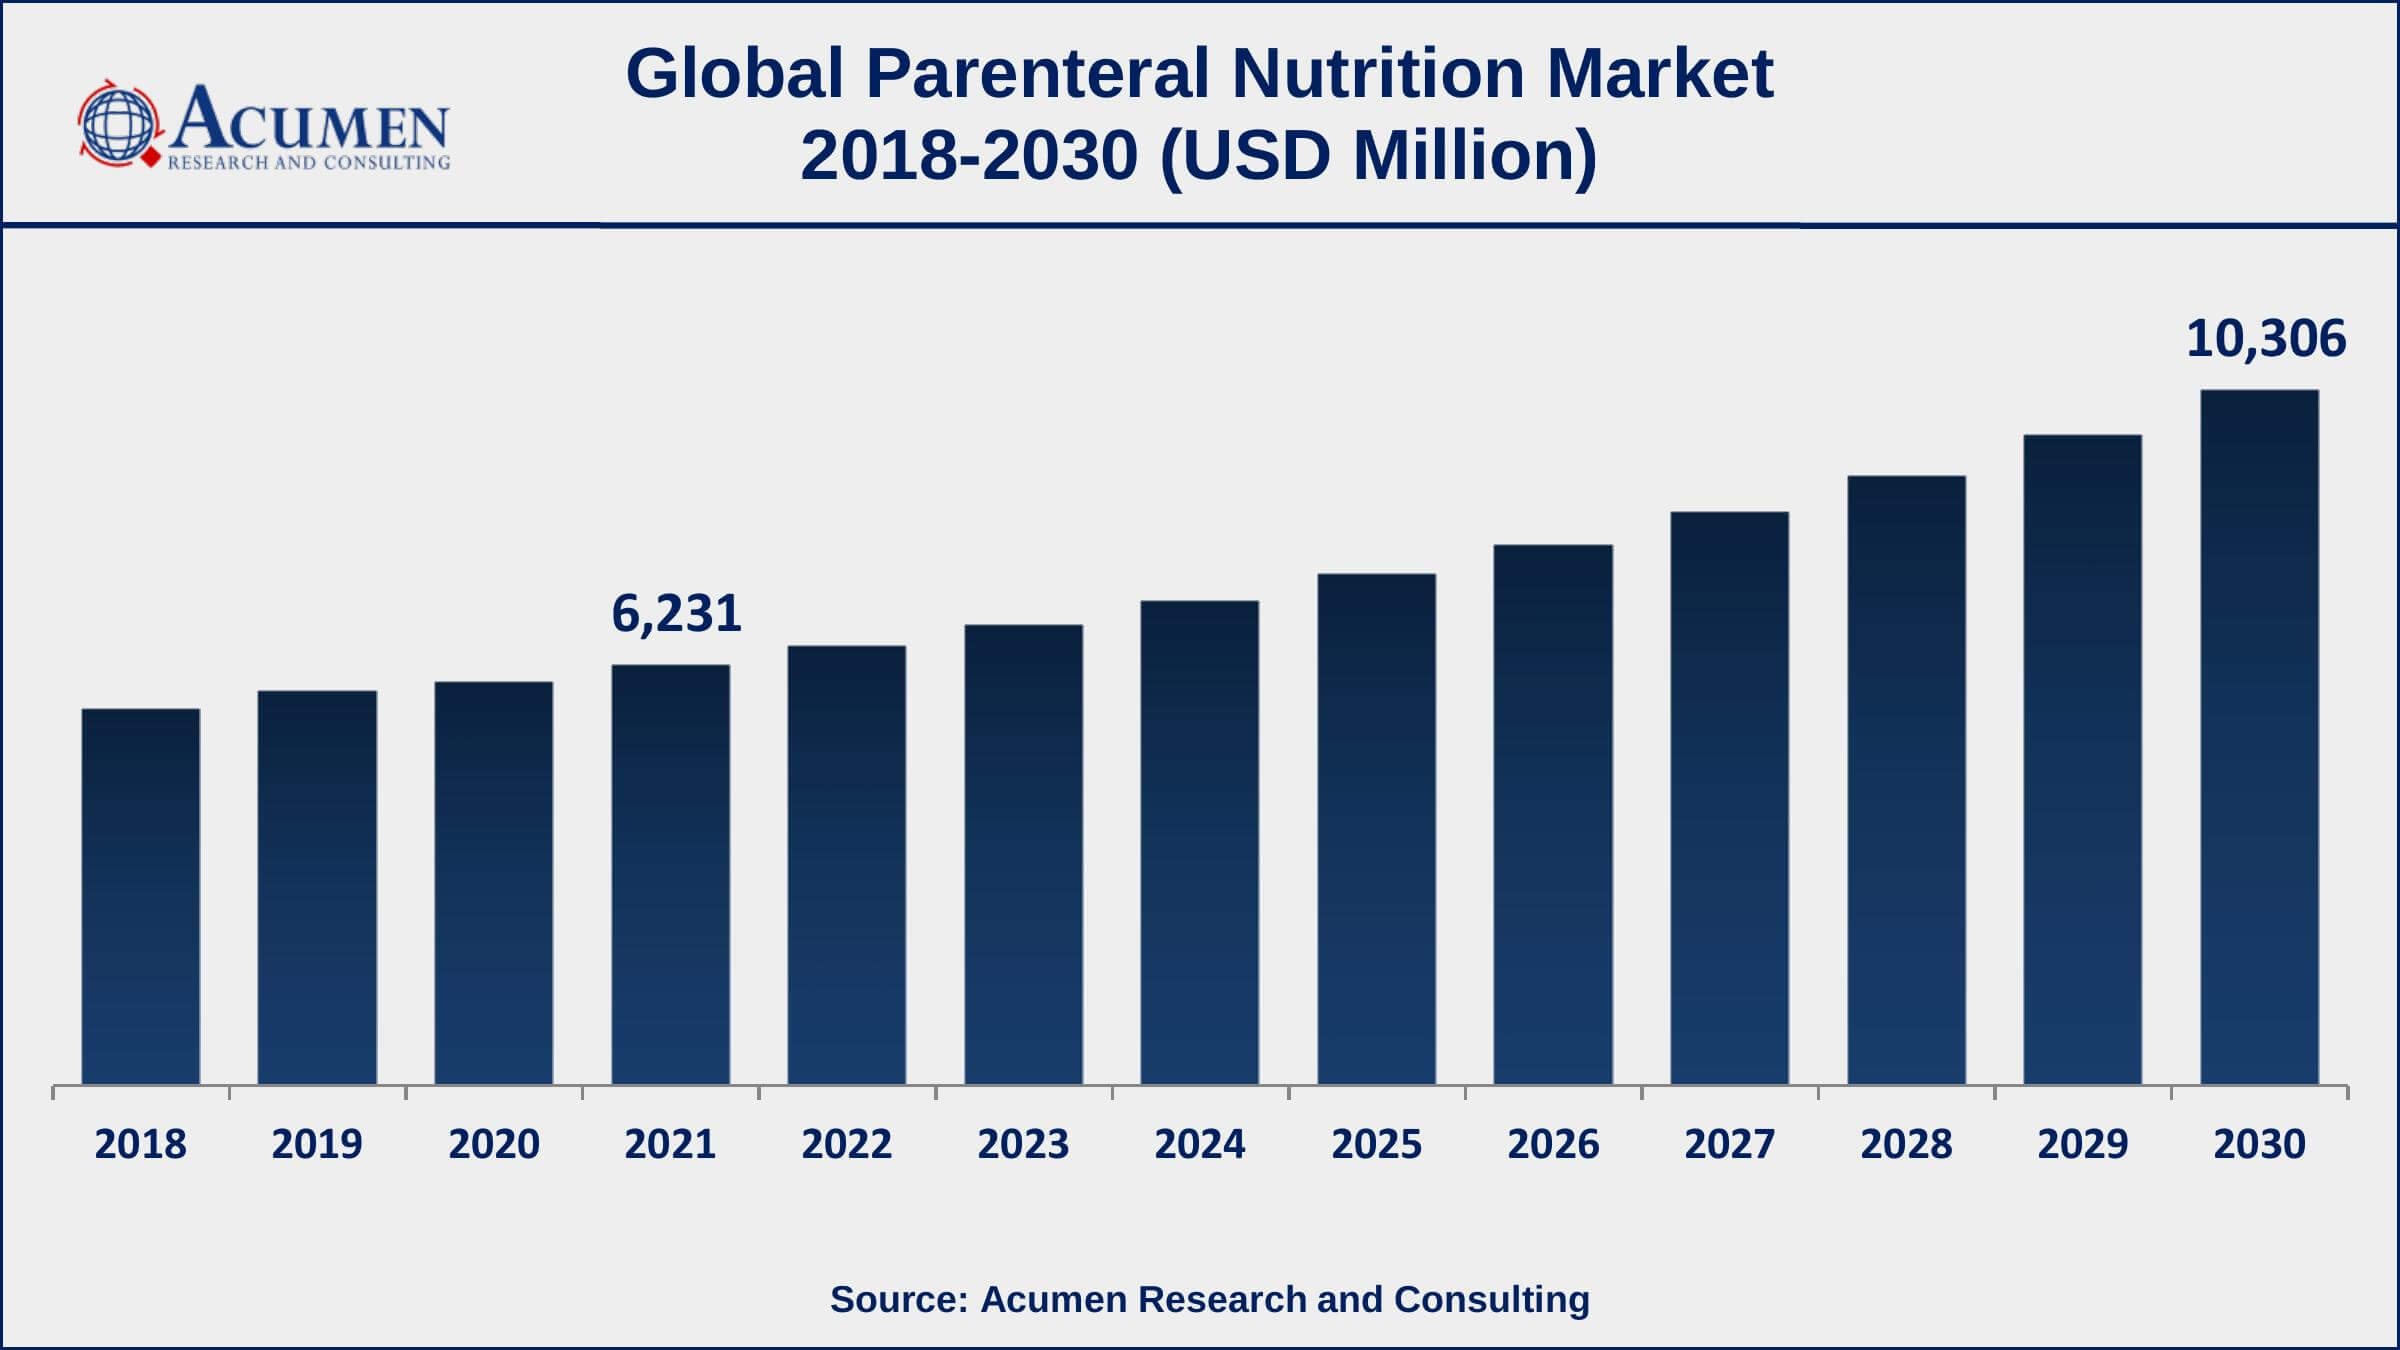 Asia-Pacific parenteral nutrition market growth will observe strongest CAGR from 2022 to 2030